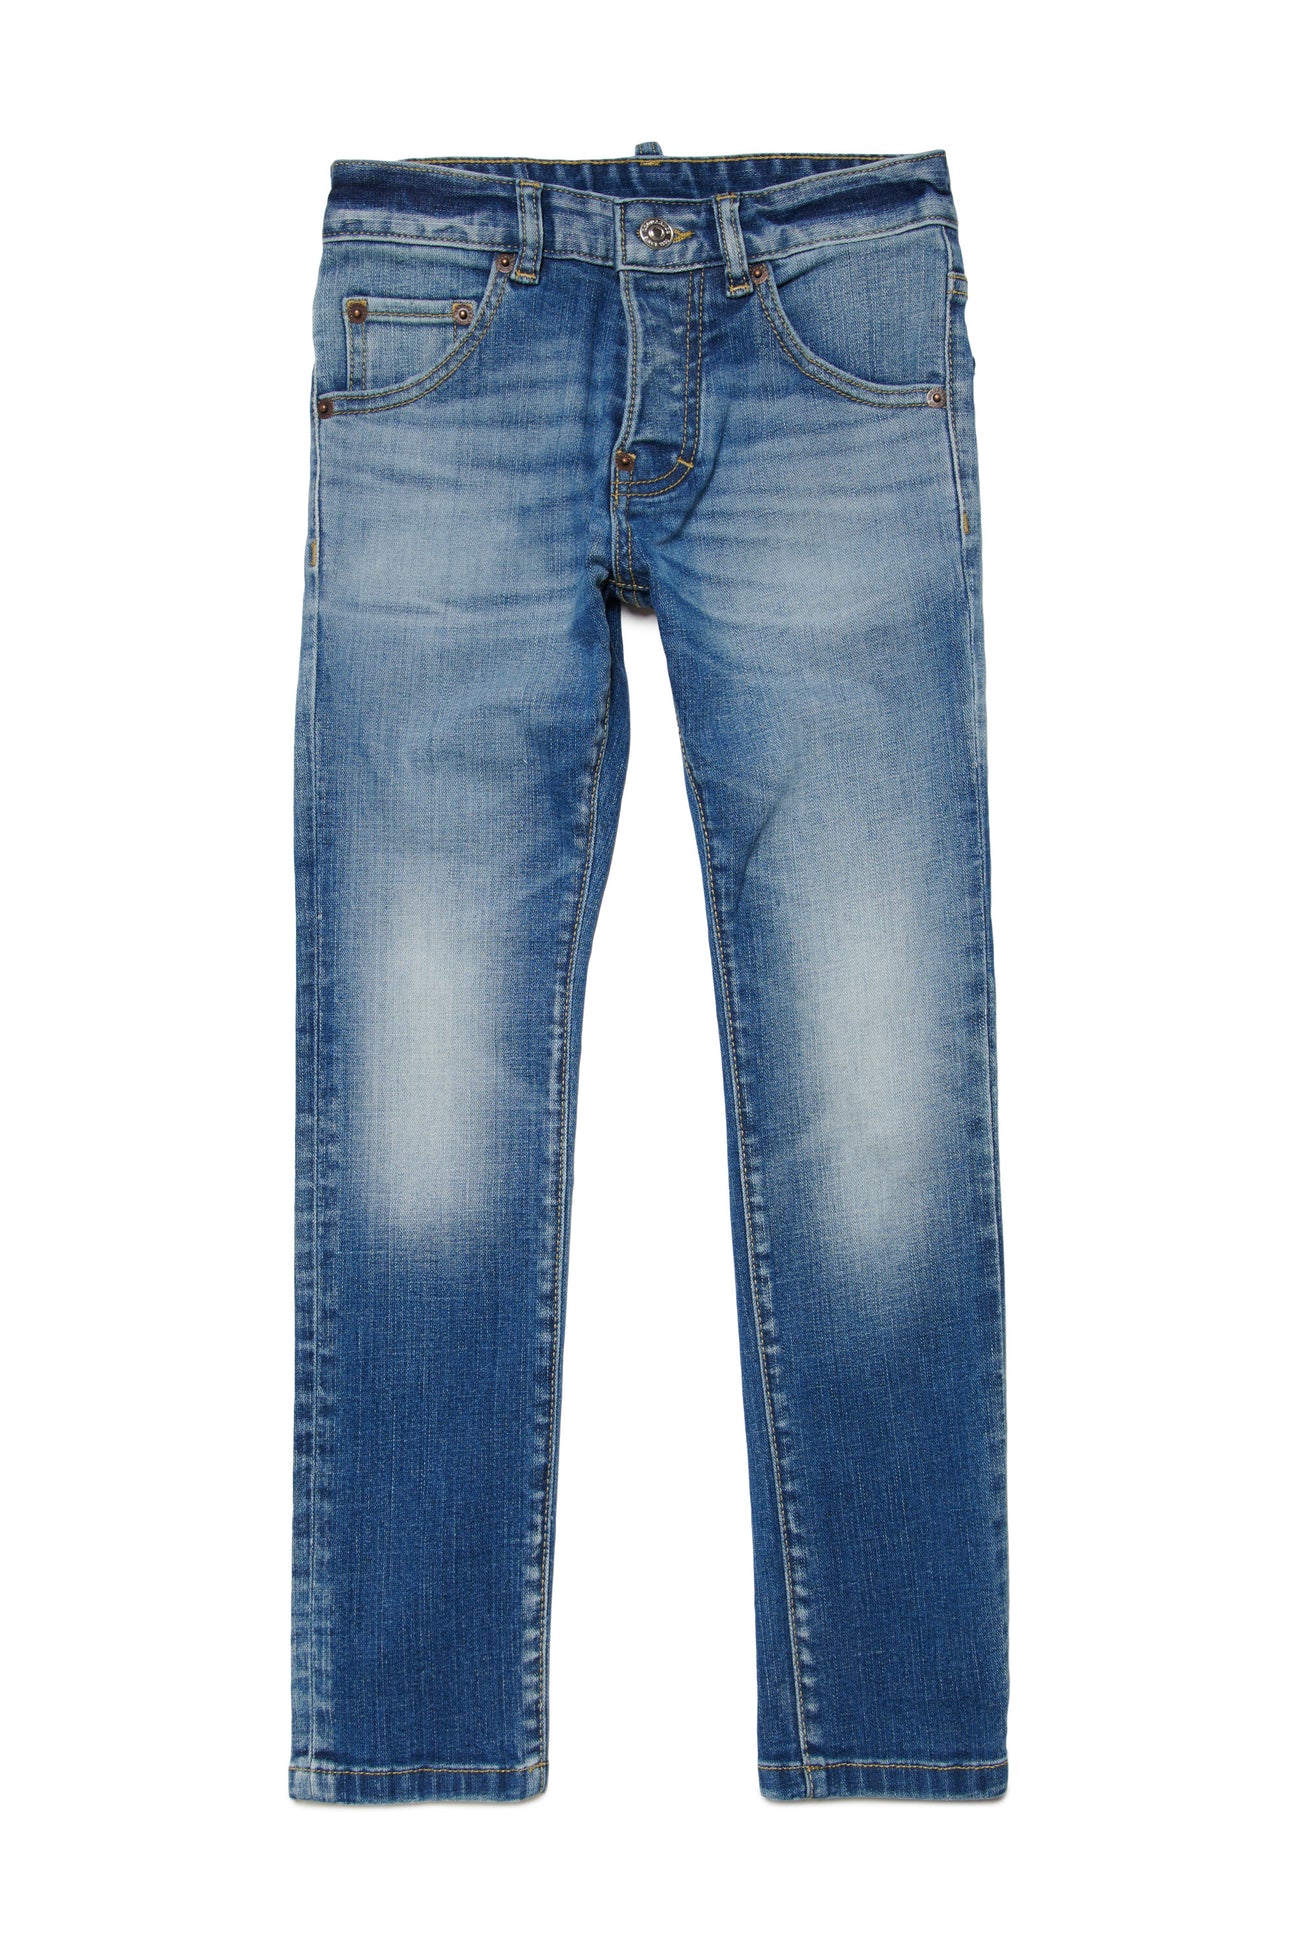 Shaded blue skinny jeans - Cool Guy 